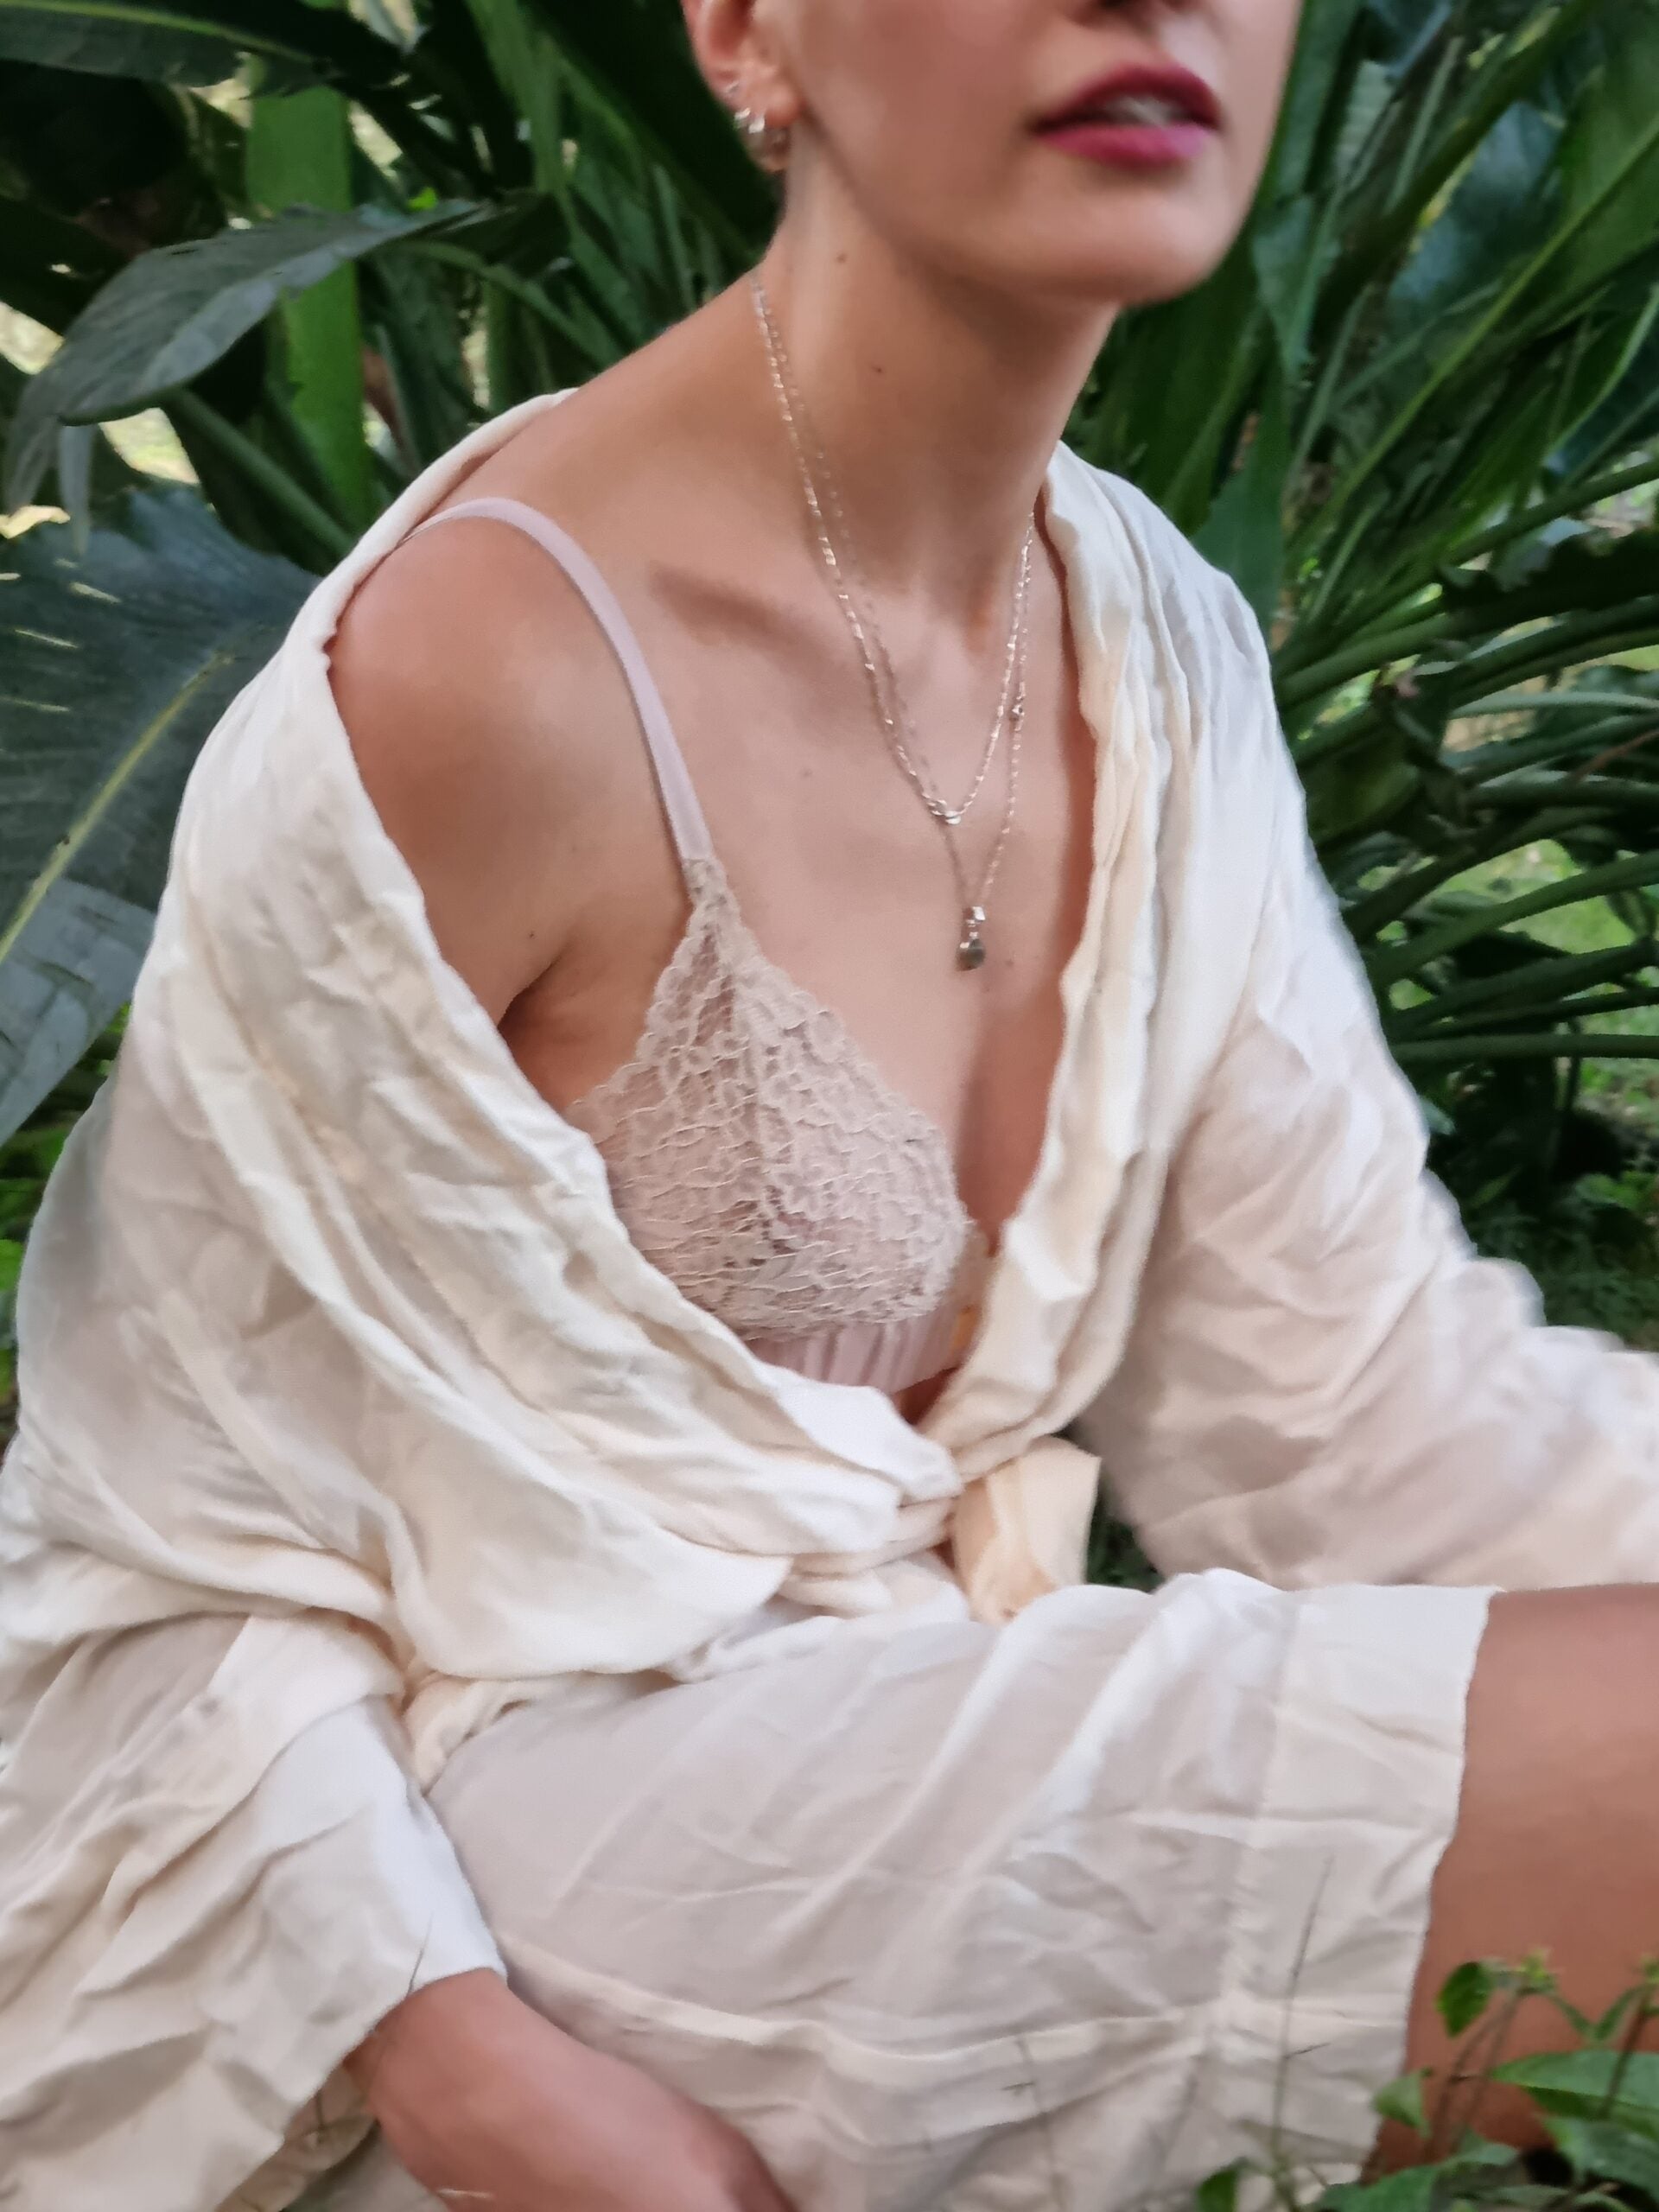 Woman sitting in her garden wearing a bralet and a white linen robe. The robe is falling off of her one shoulder, exposing the pink bralet on that side.